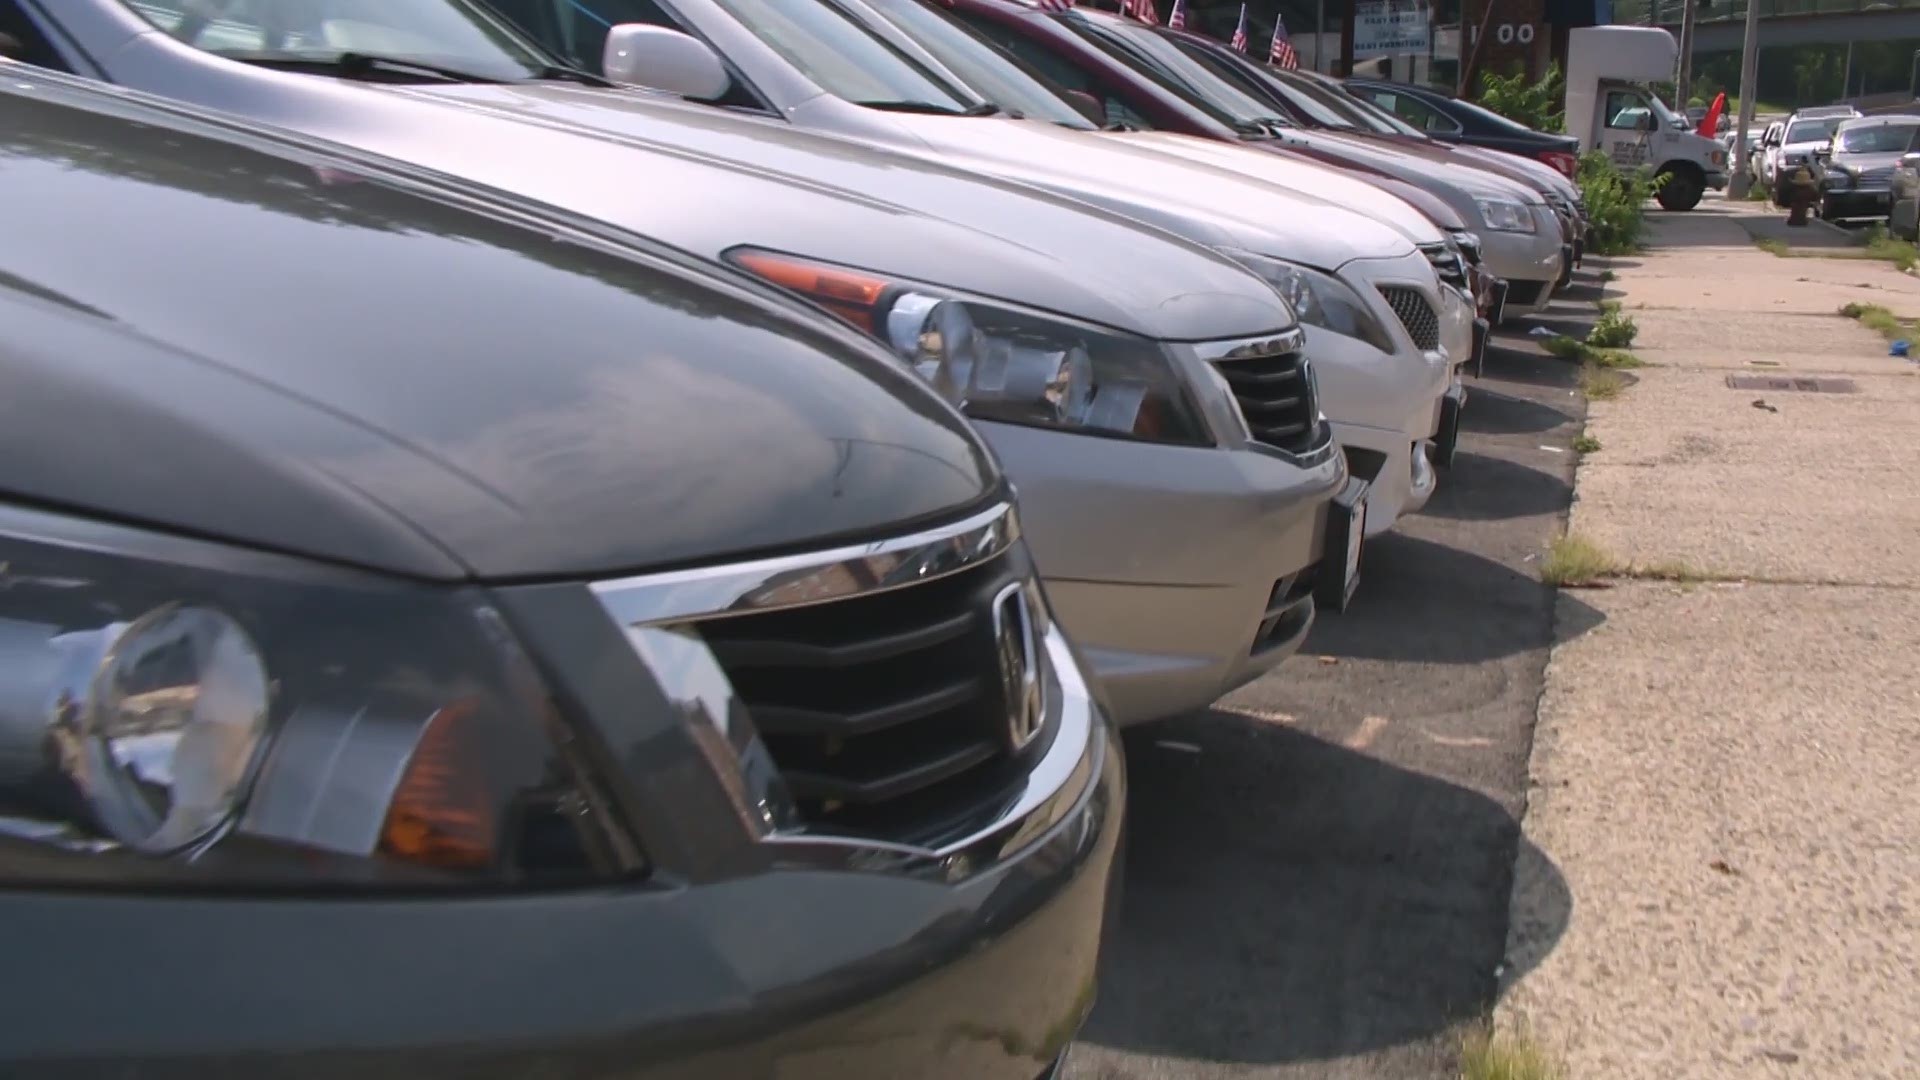 As Consumer Reports explains, you may actually be able get a great deal on a new or used car right now.